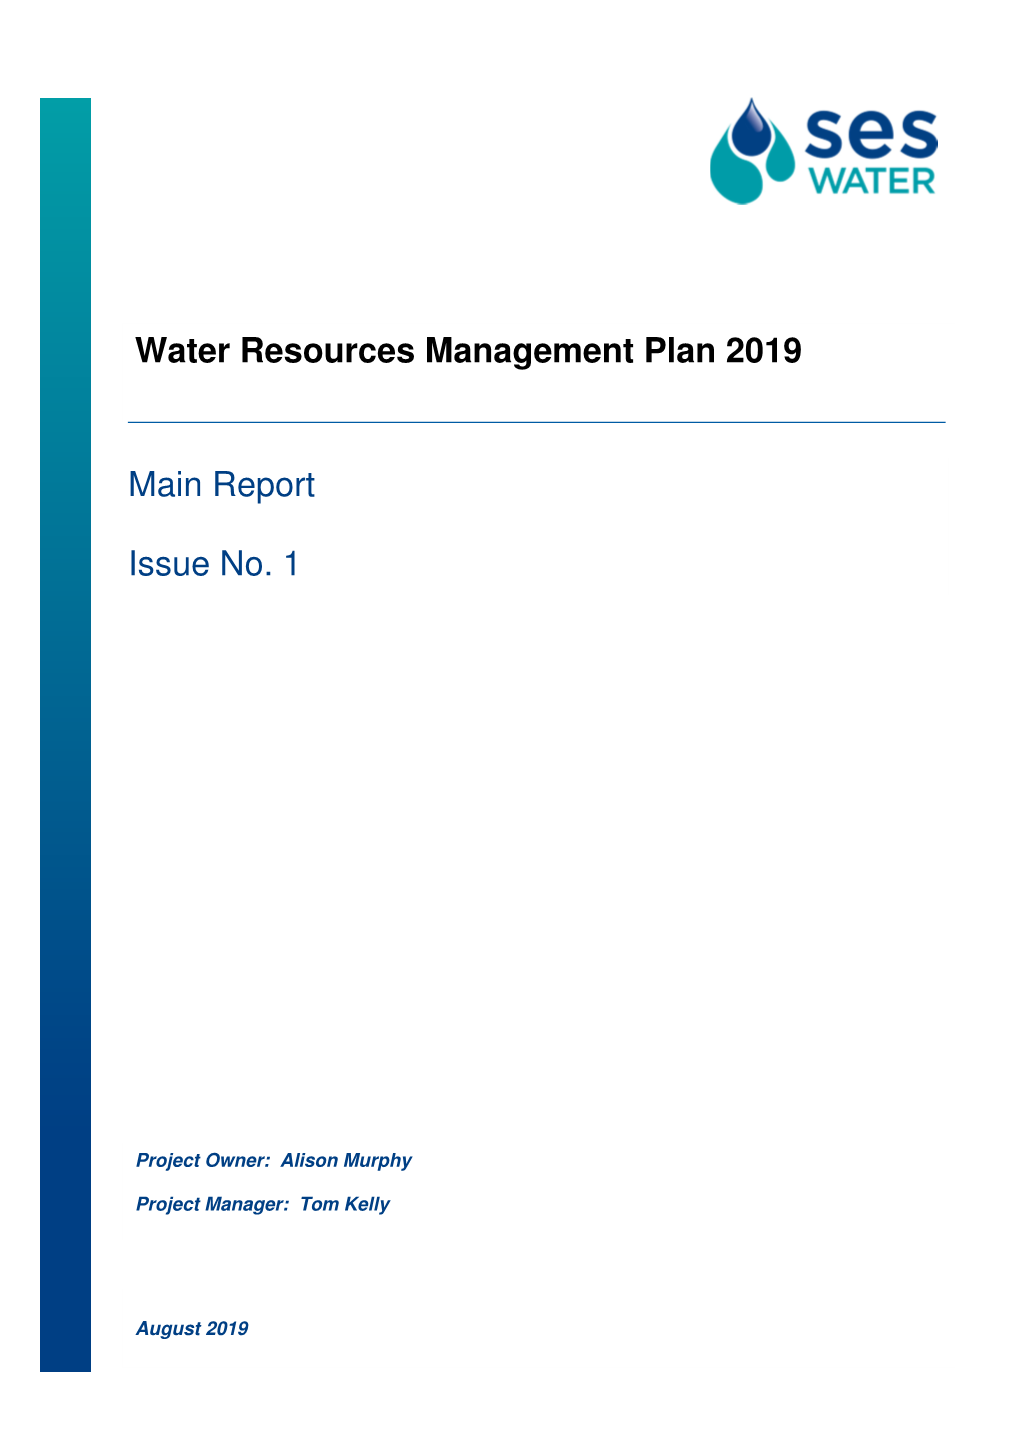 Water Resources Management Plan 2019 Main Report Issue No. 1